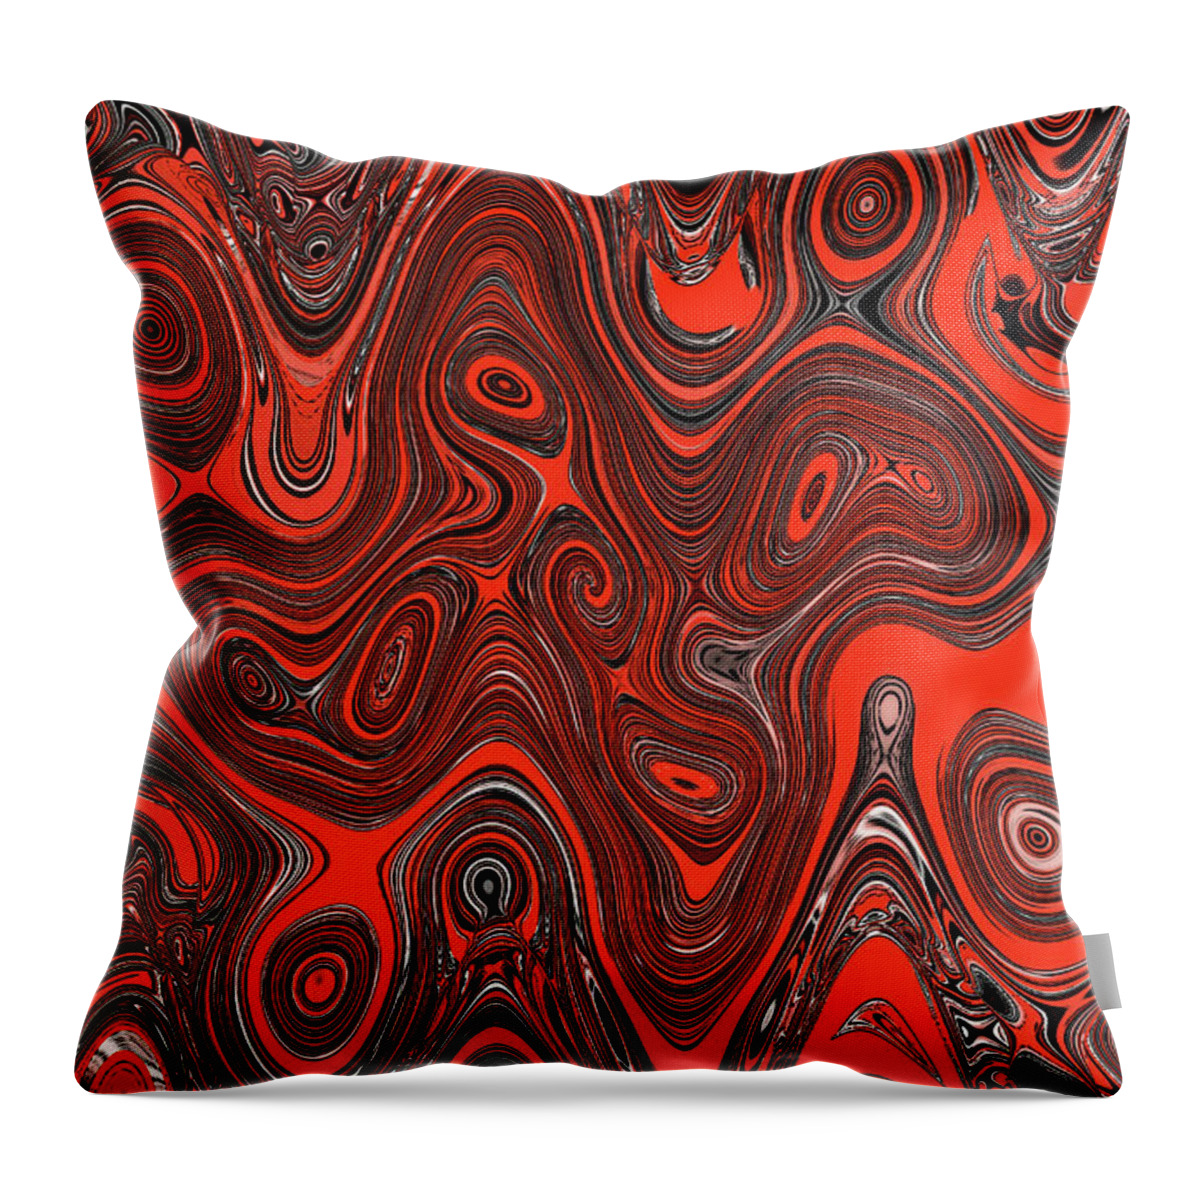 Six Tomatoes Abstract #6 Throw Pillow featuring the digital art Six Tomatoes Abstract #6 by Tom Janca